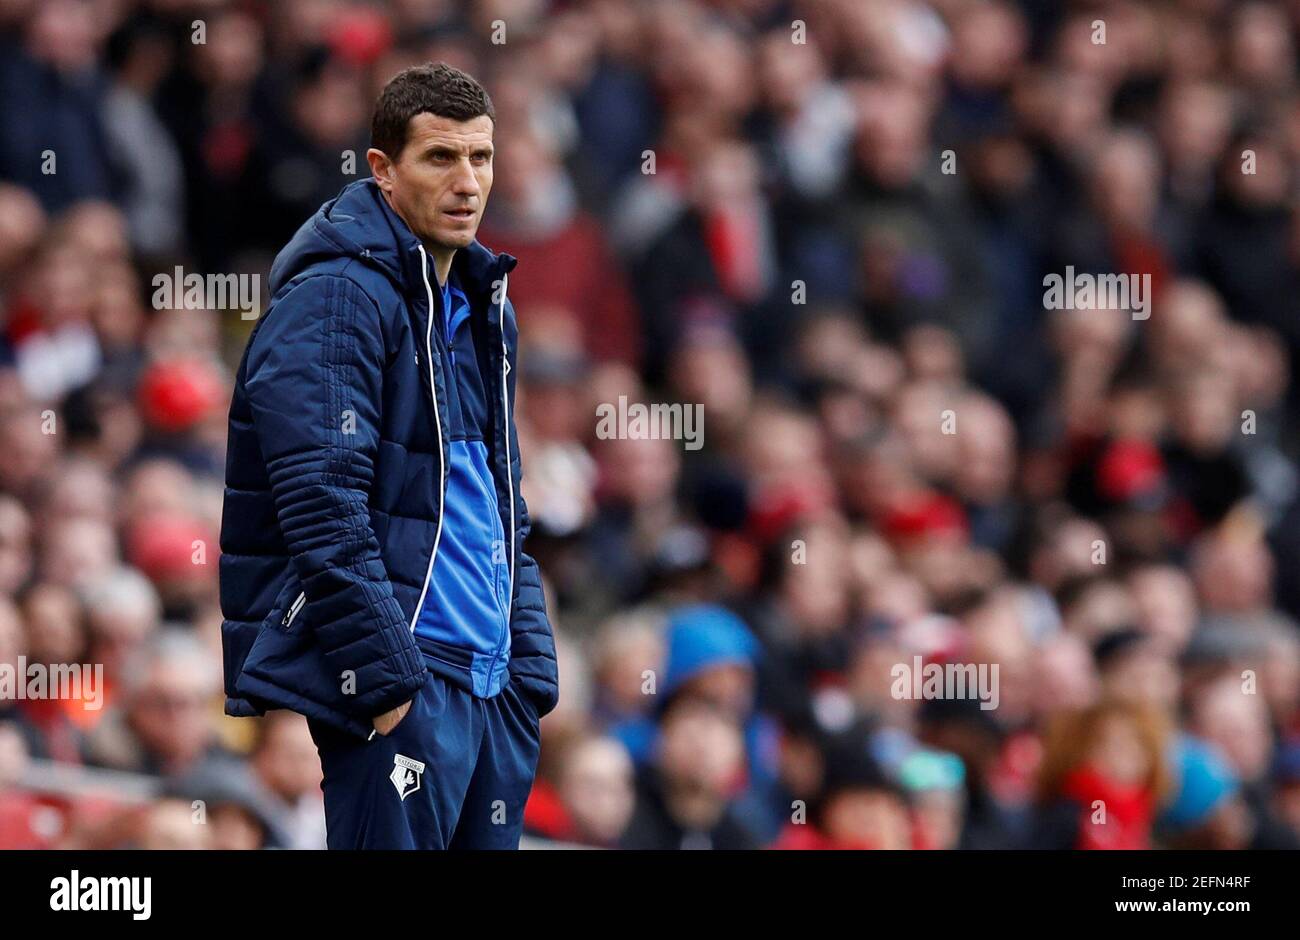 Soccer Football - Premier League - Arsenal vs Watford - Emirates Stadium, London, Britain - March 11, 2018   Watford manager Javi Gracia            REUTERS/Eddie Keogh    EDITORIAL USE ONLY. No use with unauthorized audio, video, data, fixture lists, club/league logos or 'live' services. Online in-match use limited to 75 images, no video emulation. No use in betting, games or single club/league/player publications.  Please contact your account representative for further details. Stock Photo